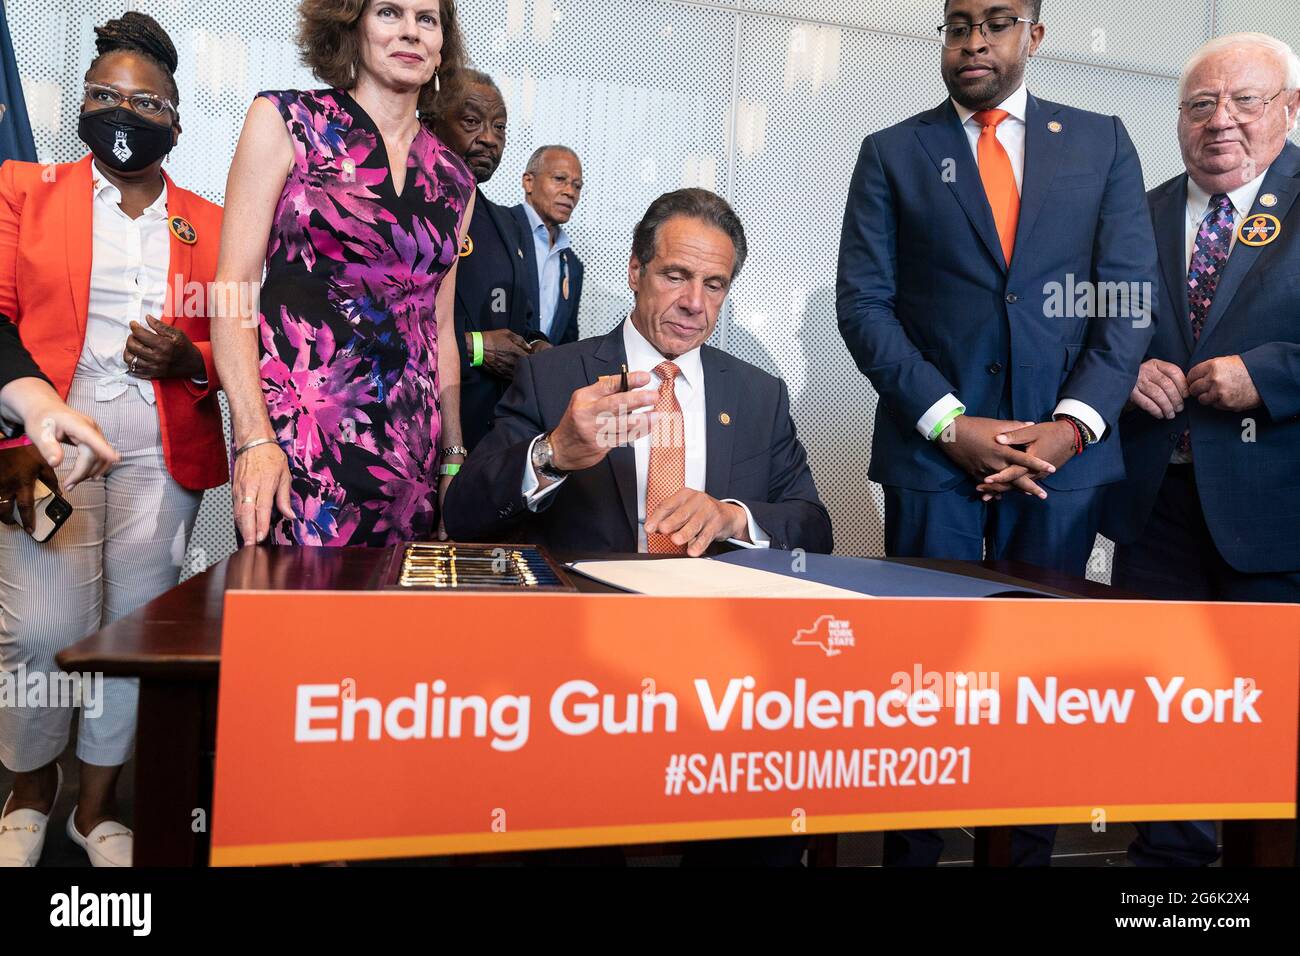 Governor Andrew Cuomo makes an announcement regarding gun violence in the state at John Jay College of Criminal Justice. Governor declared Disaster Emergency in order to tackled gun violence across the state. He announced the program to create well paying jobs, education, sport programs with investment by state by $138, 7 million. He was joined by anti-gun activists, clergy and union leaders who will help to implement this program. He also signed legislation Hold Gun Manufacturers Liable for Their Products Creating a Public Nuisance and closing loophole allowing people with Outstanding Warrant Stock Photo